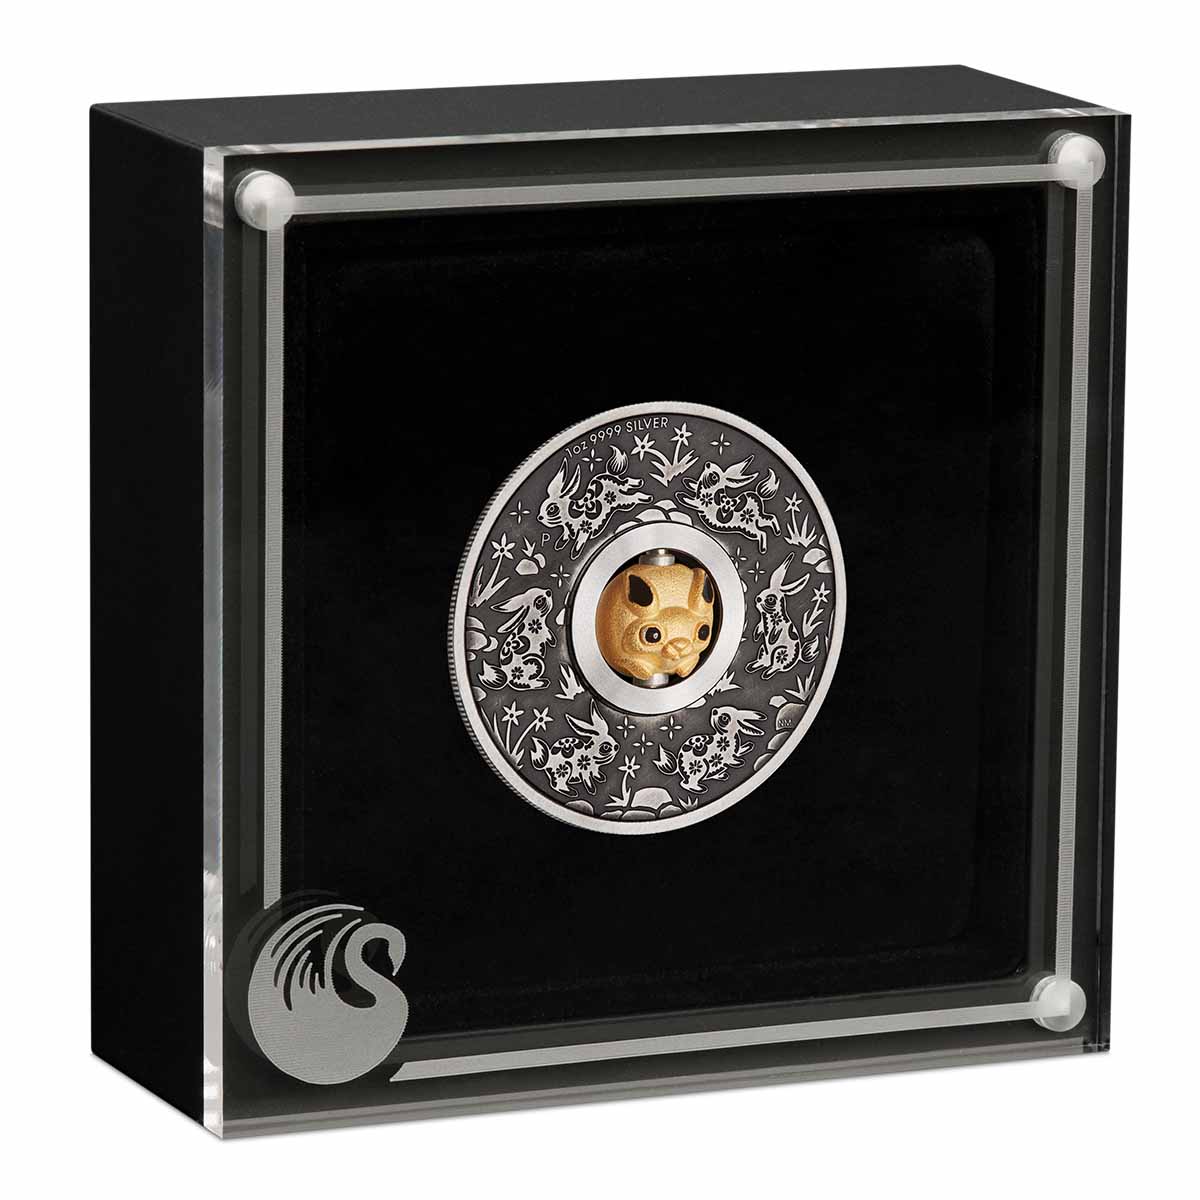 Year of the Rabbit Rotating Charm 2023 $1 1oz Silver Antiqued Coin